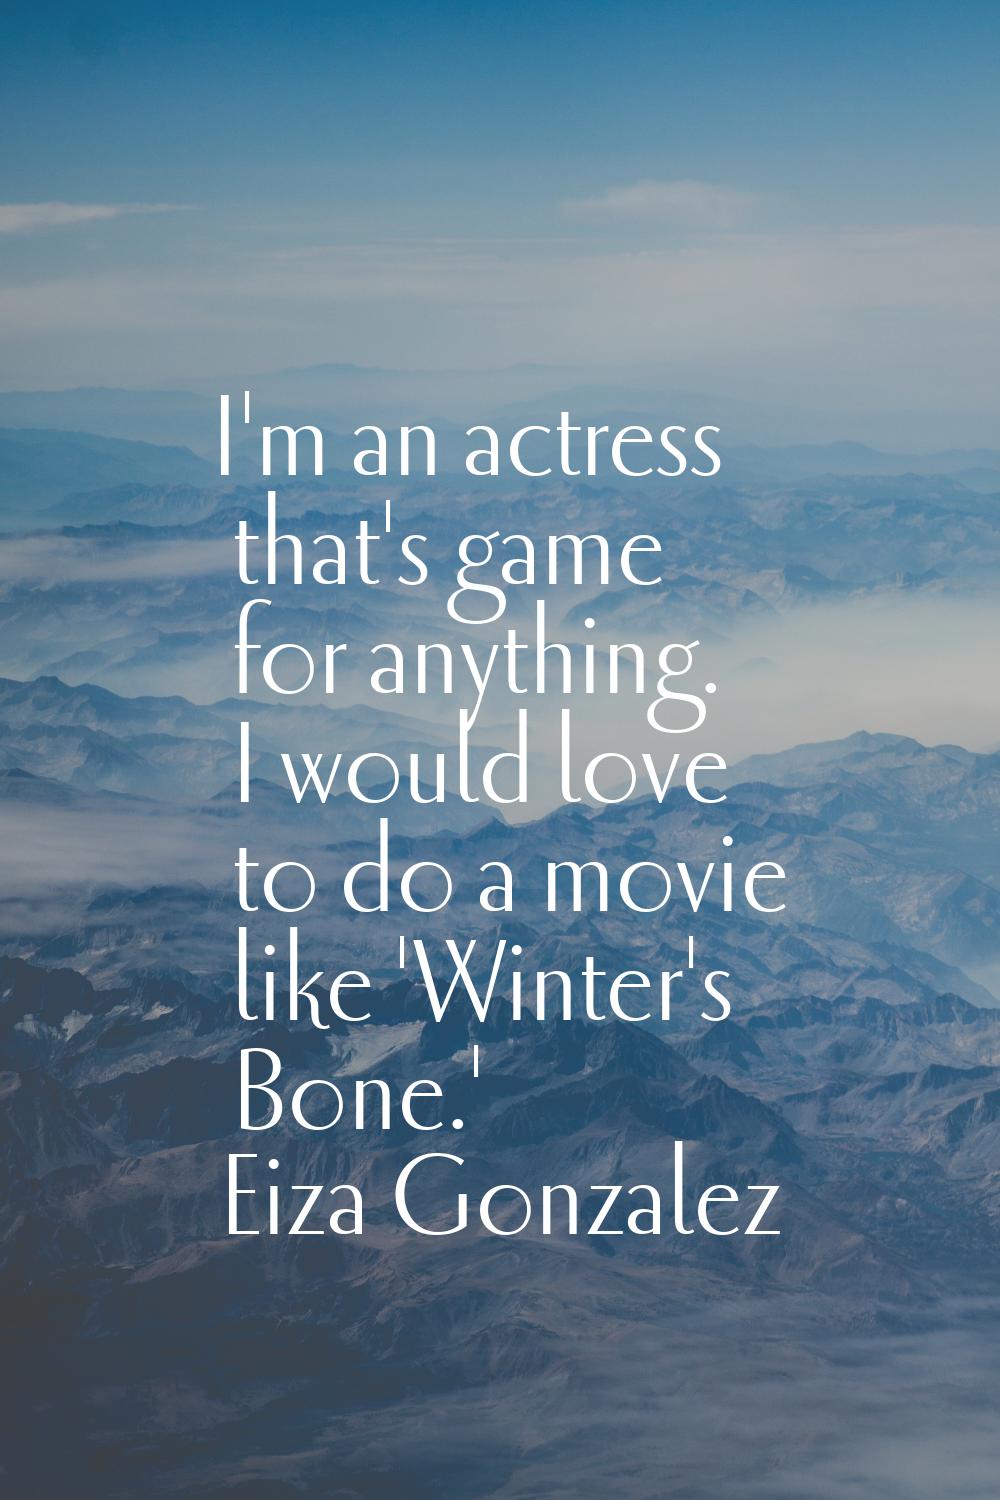 I'm an actress that's game for anything. I would love to do a movie like 'Winter's Bone.'